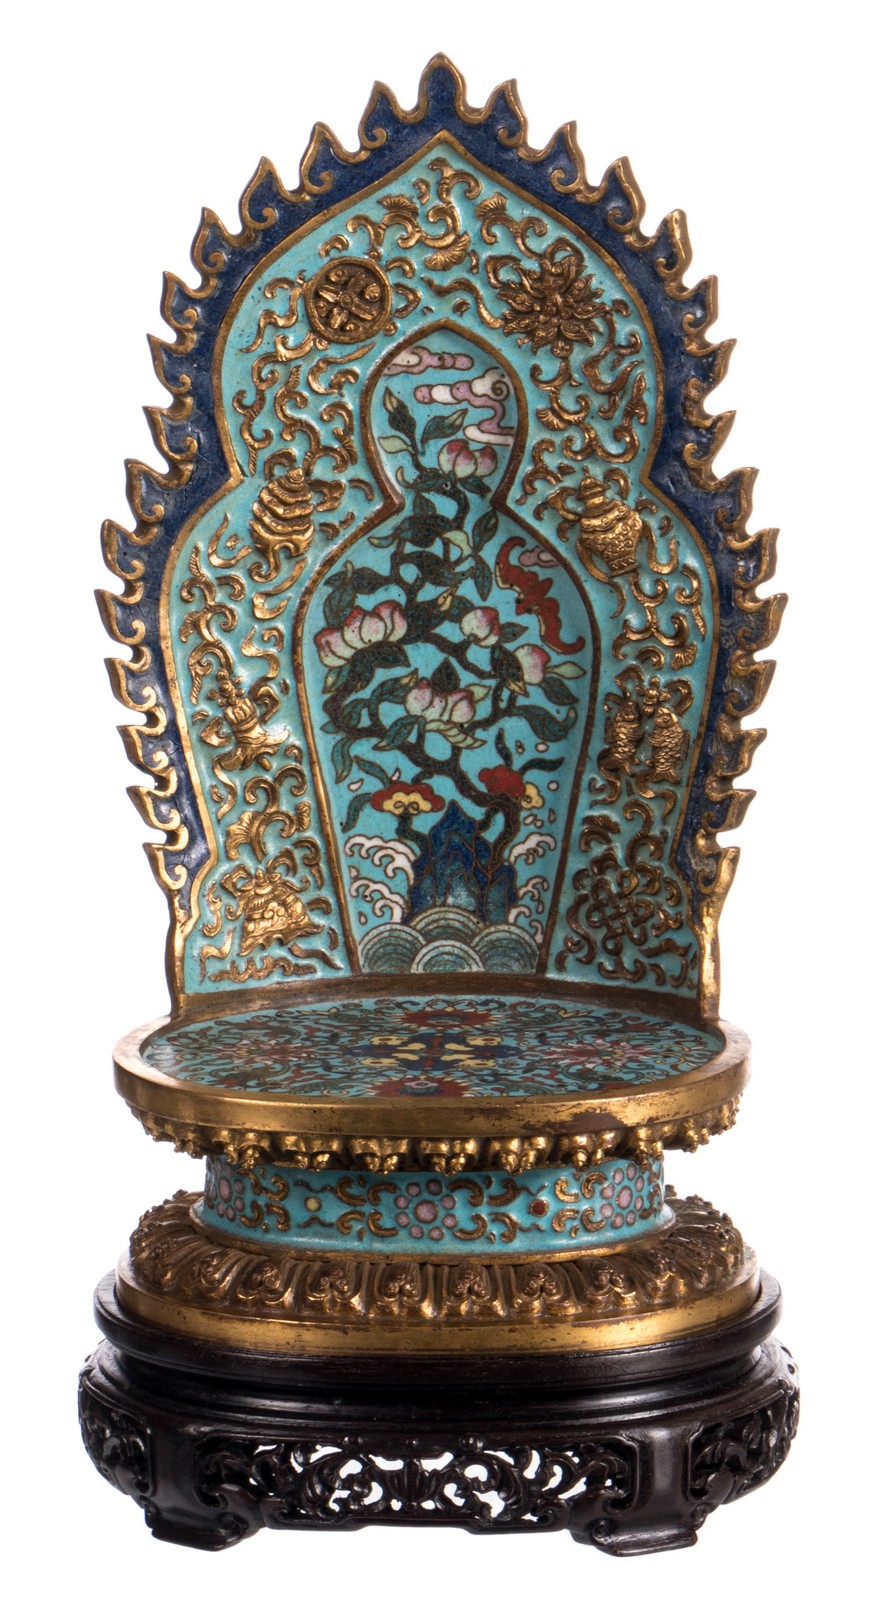 A Chinese gilt bronze cloisonné domestic altar with an aureole, floral and relief decorated, on a